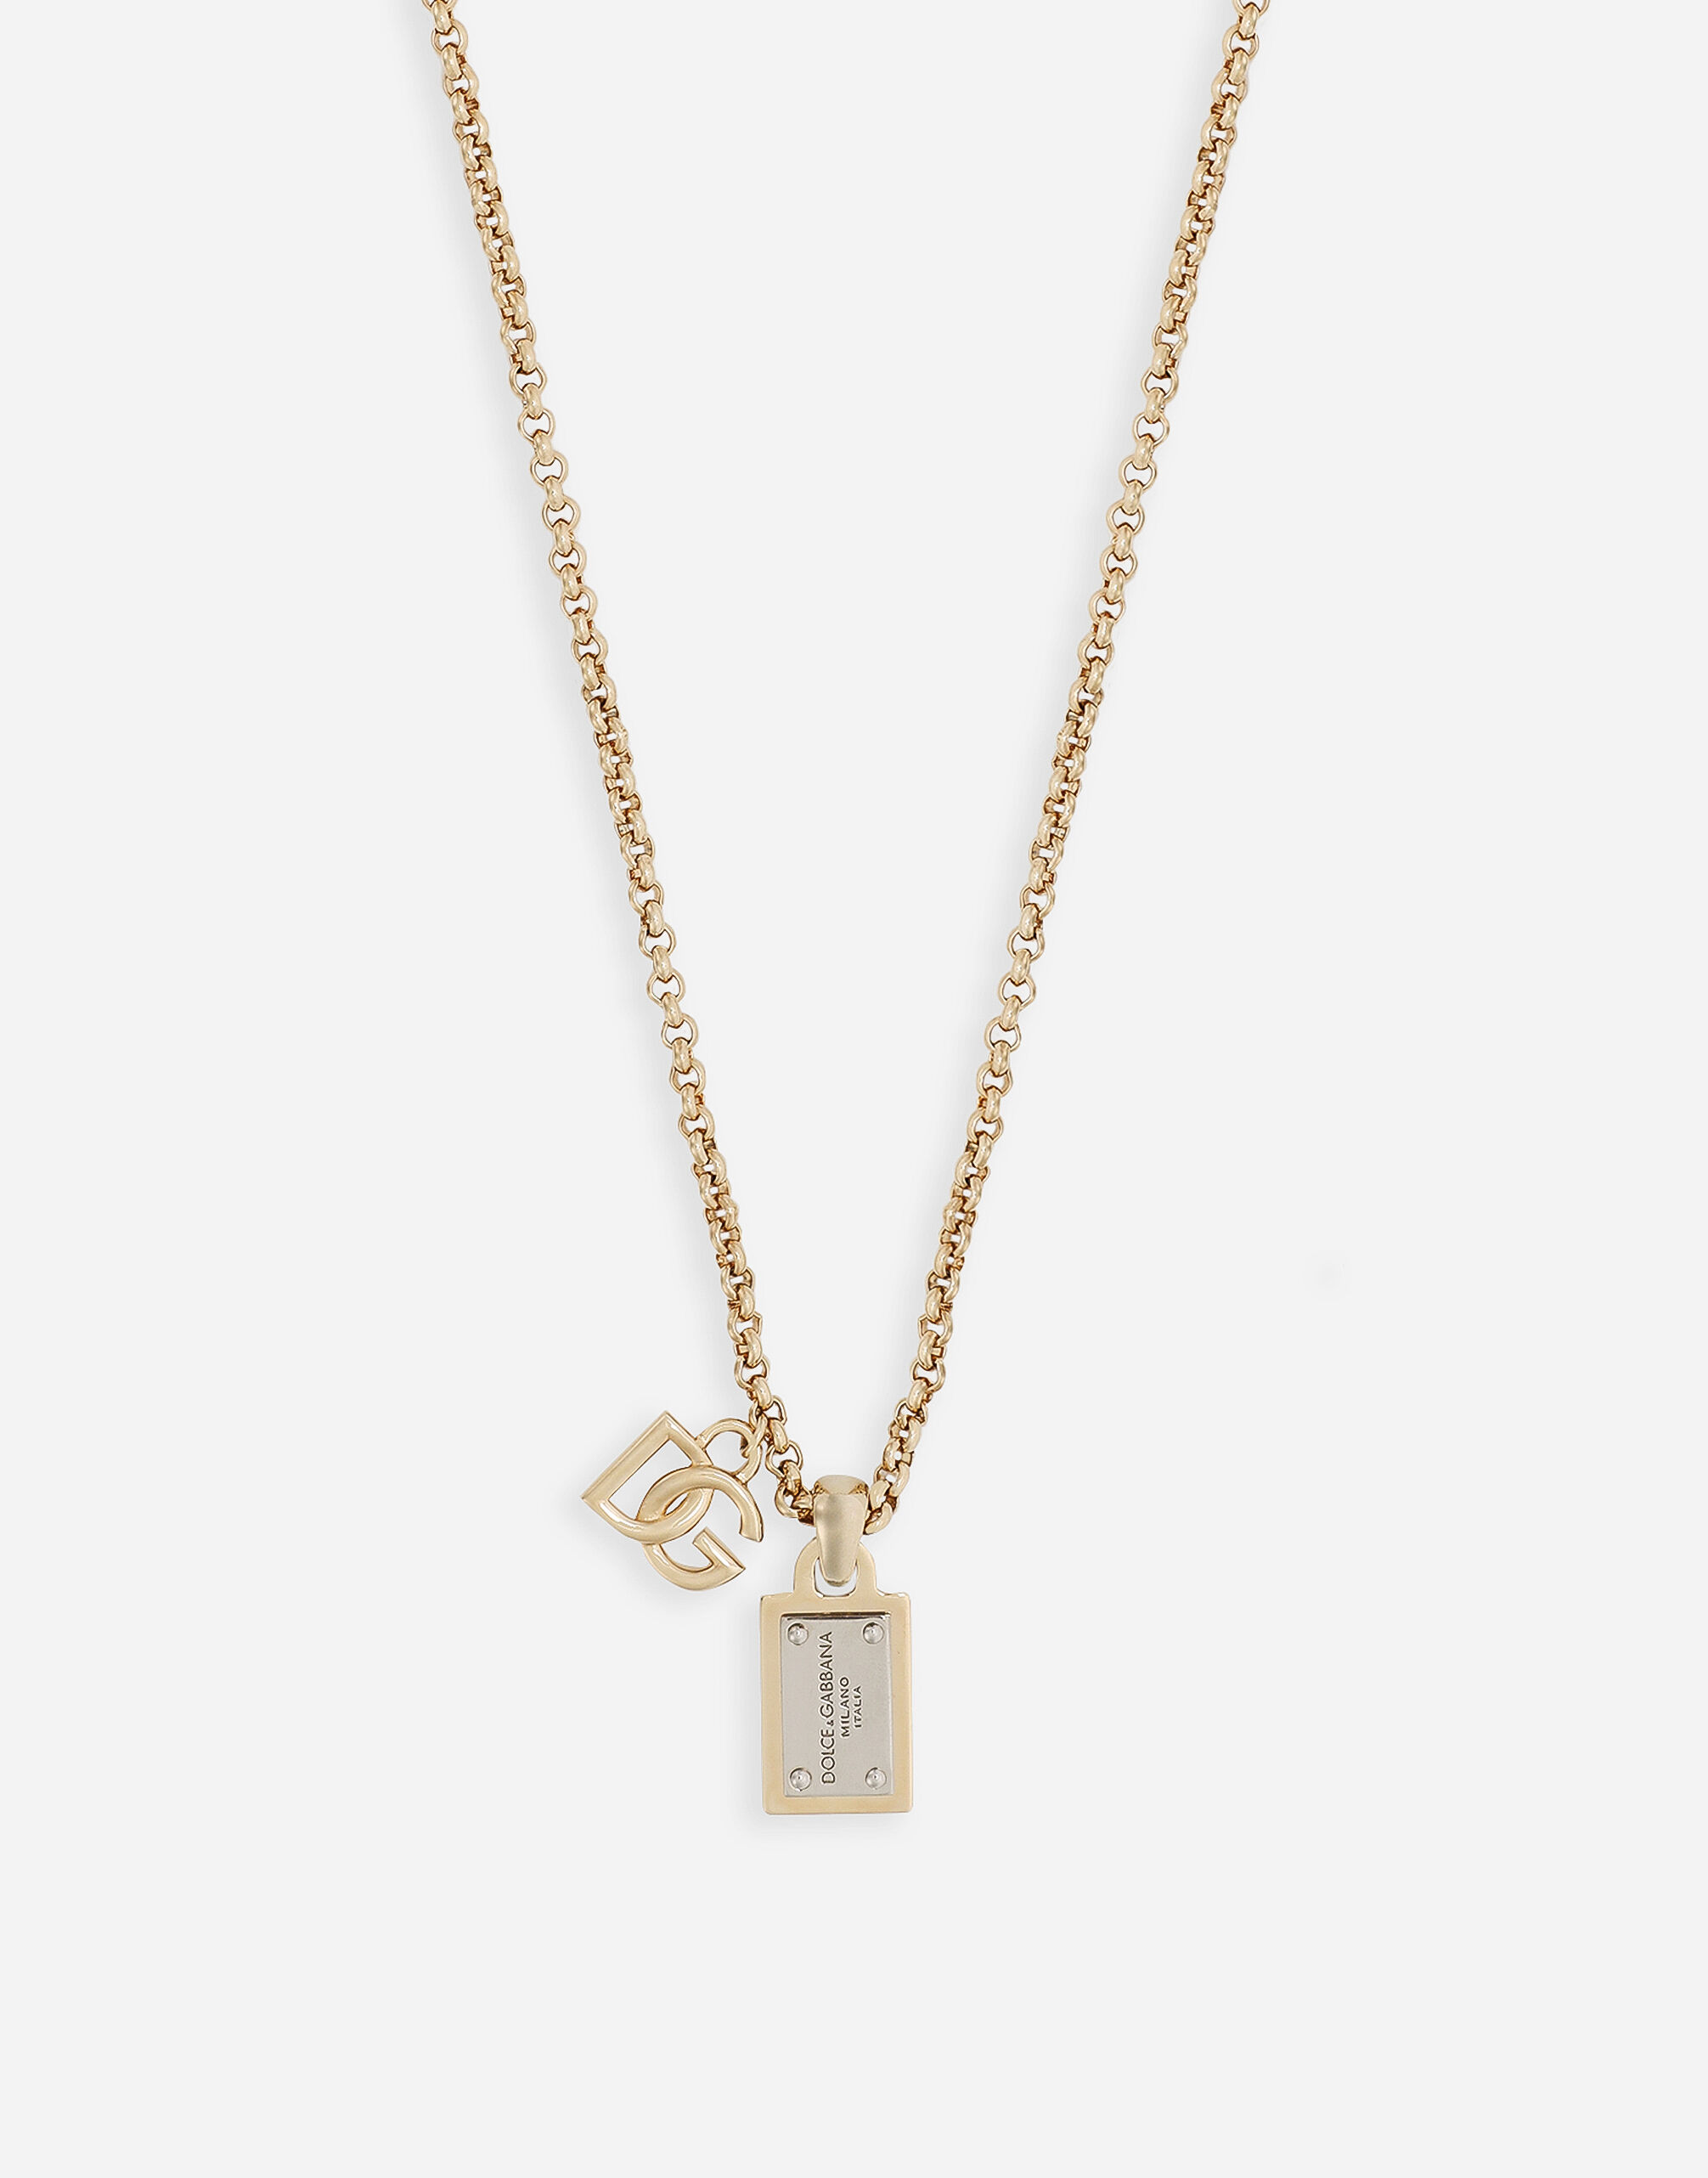 Link necklace with DG logo and tag in Gold for | Dolce&Gabbana® US